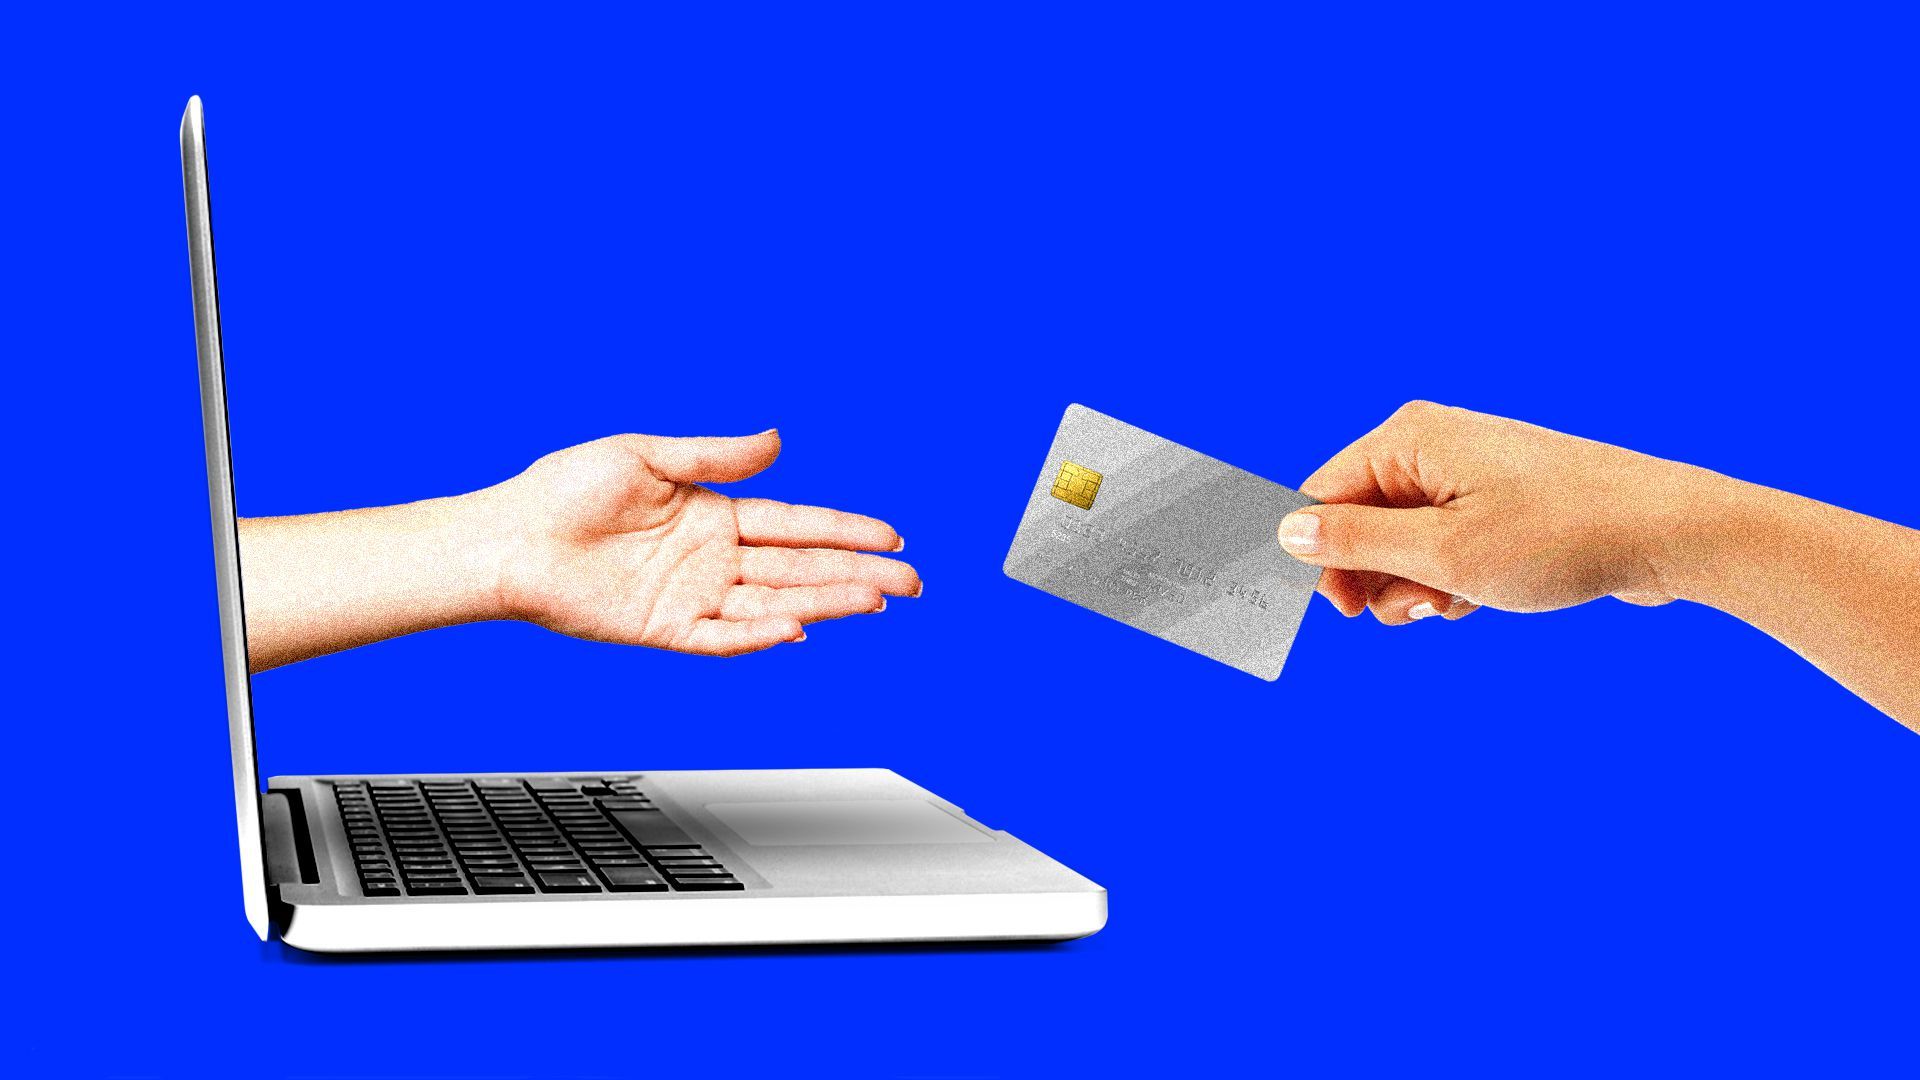 An illustration of a laptop and credit card